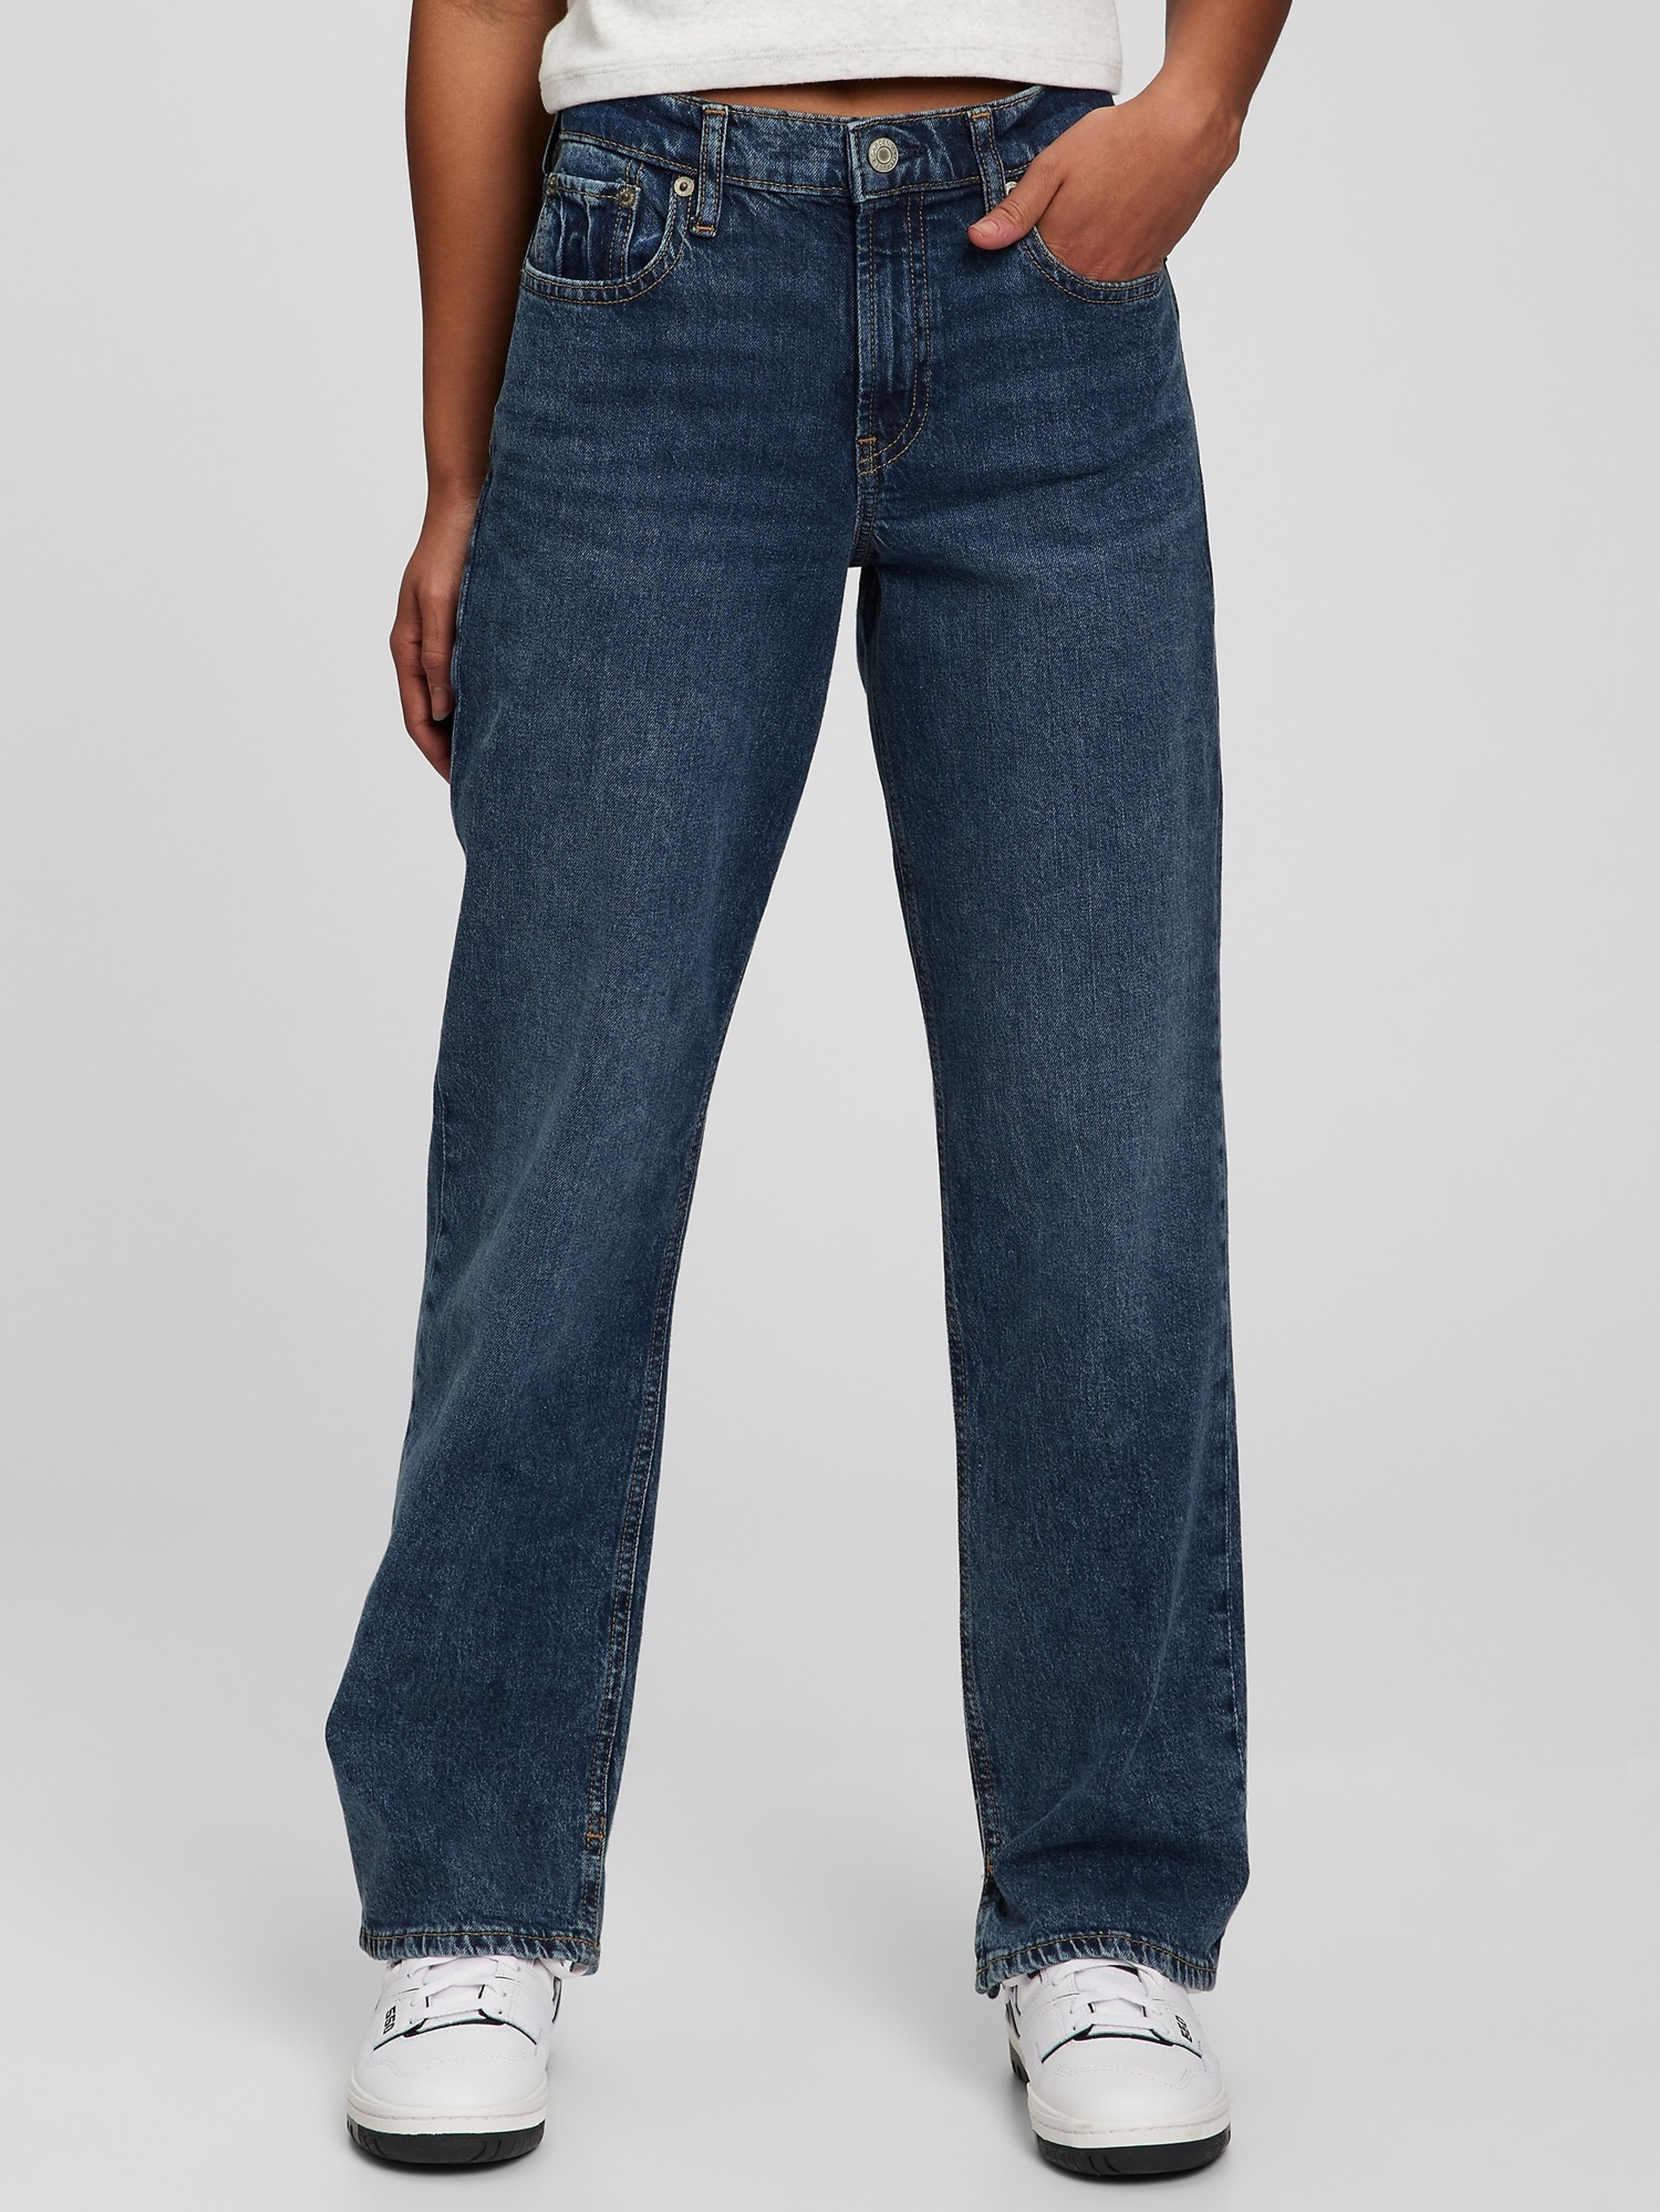 Teen Jeans mid rise '90s loose